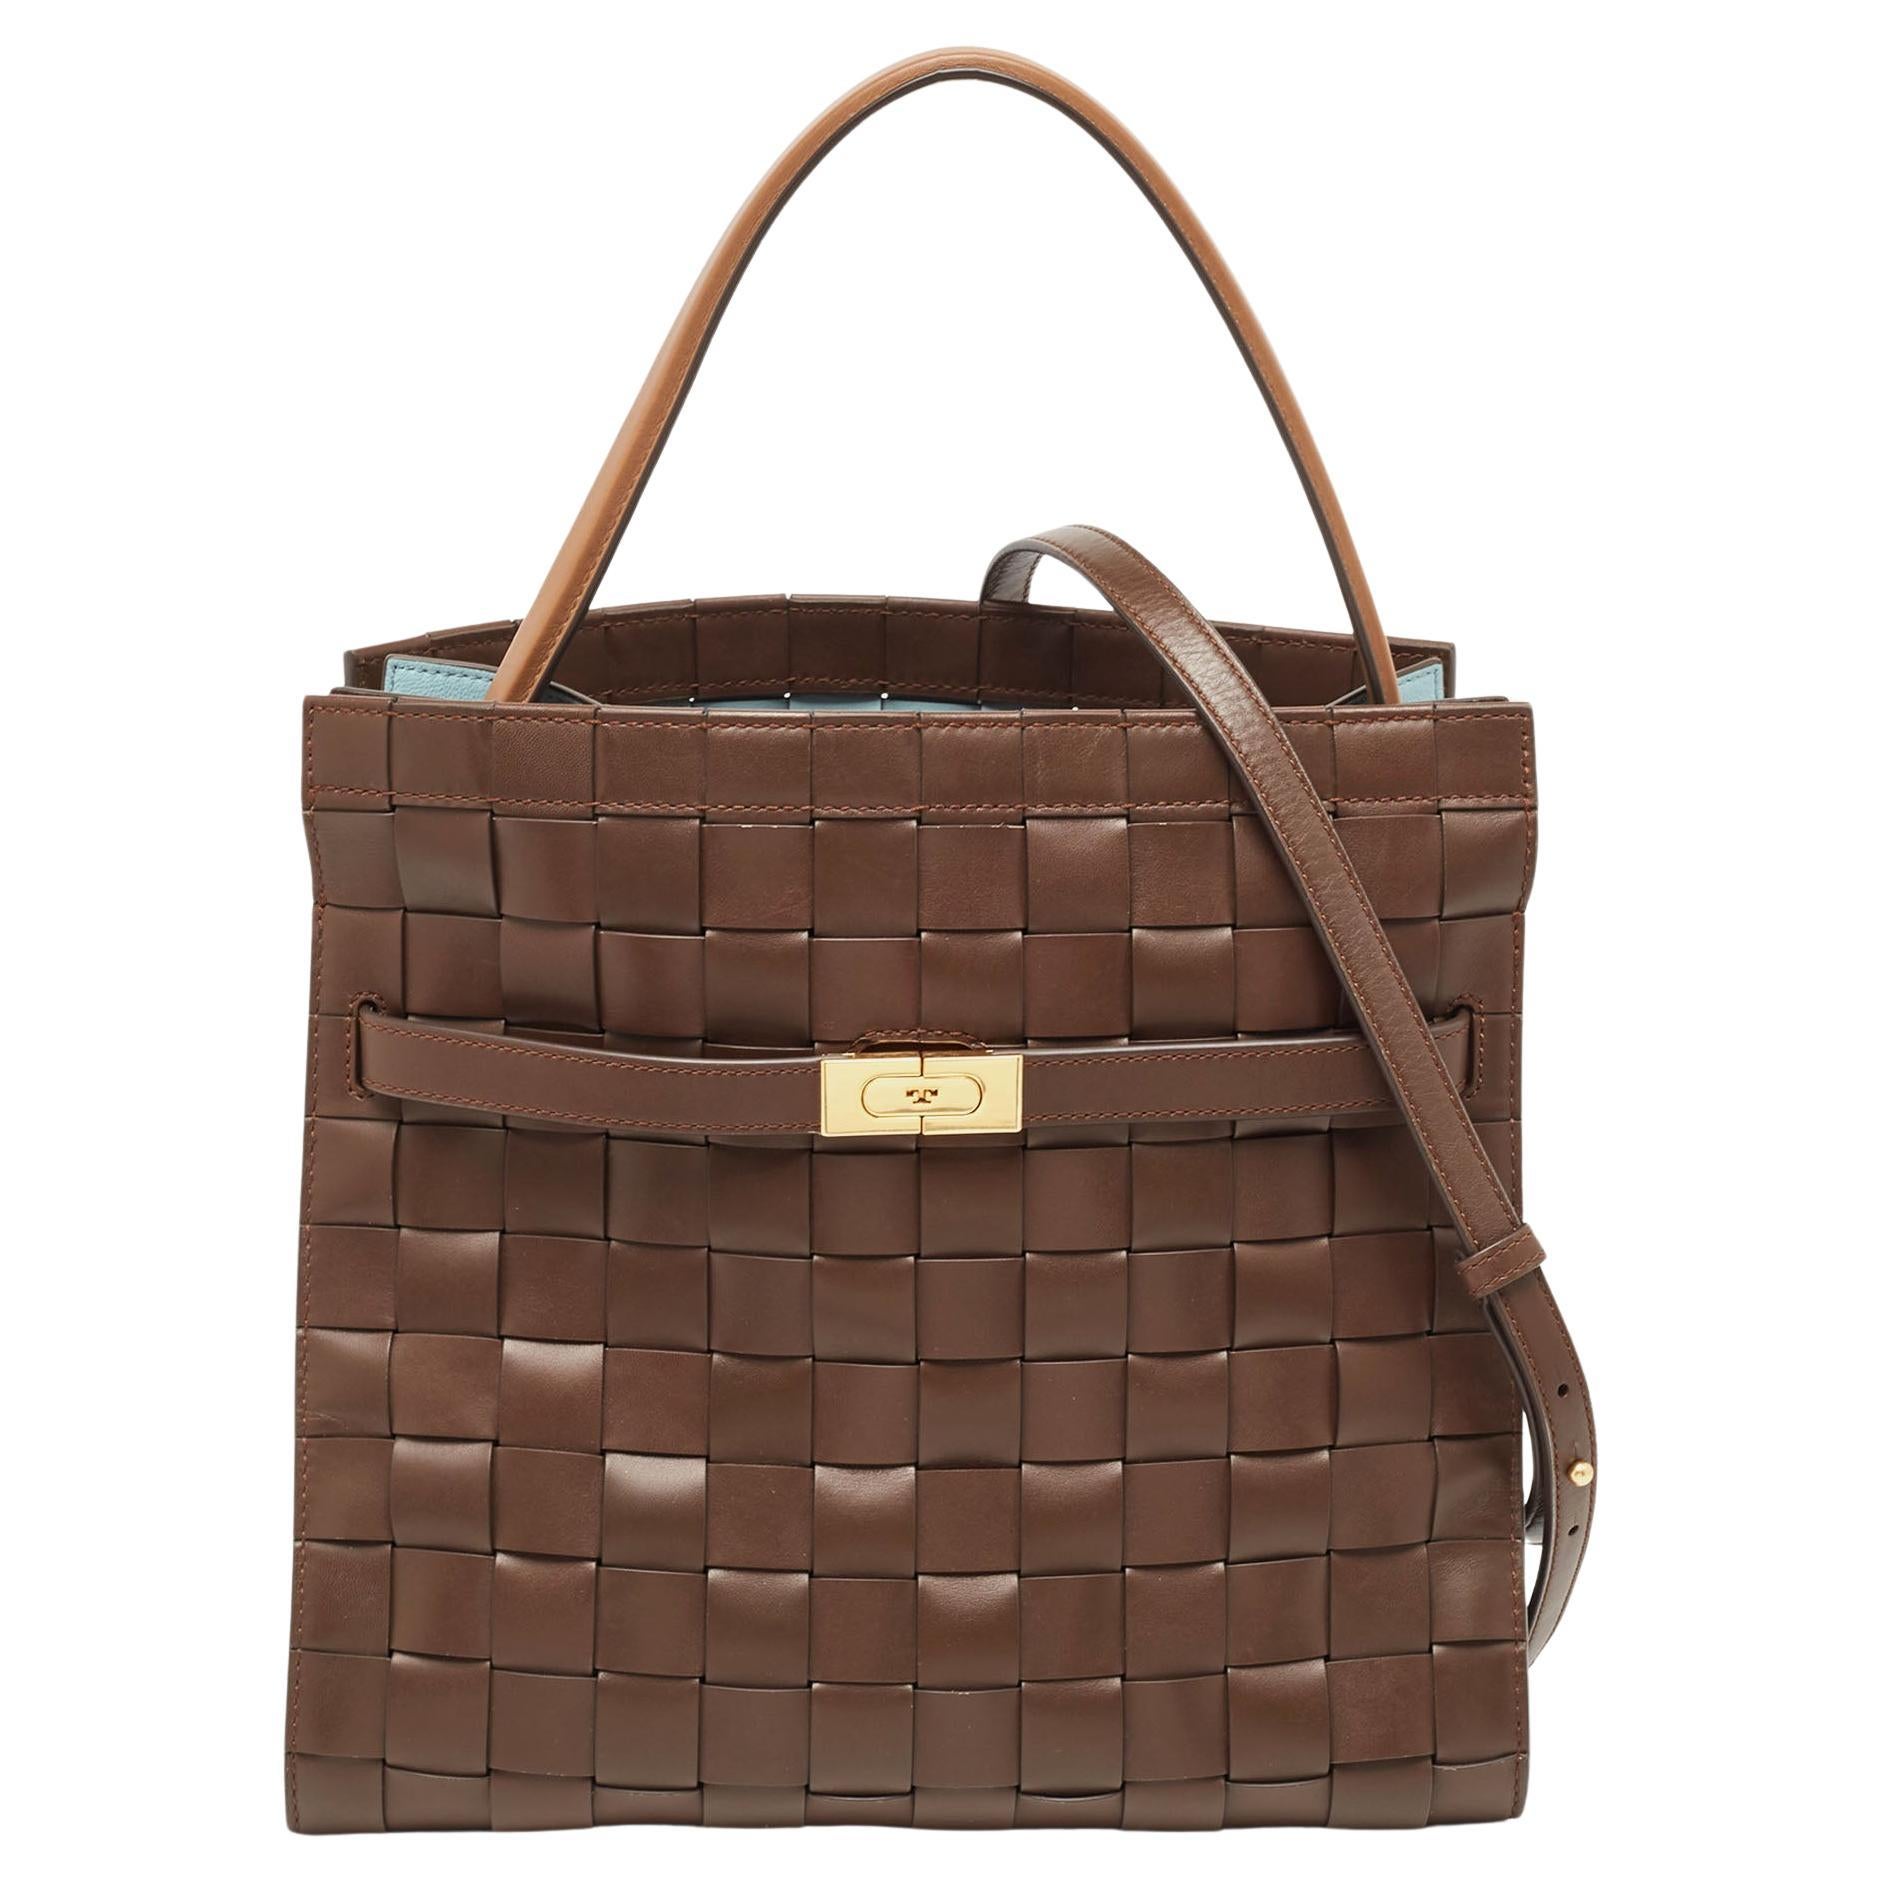 Tory Burch Brown Weave Leather Lee Radziwill Basket Top Handle Bag